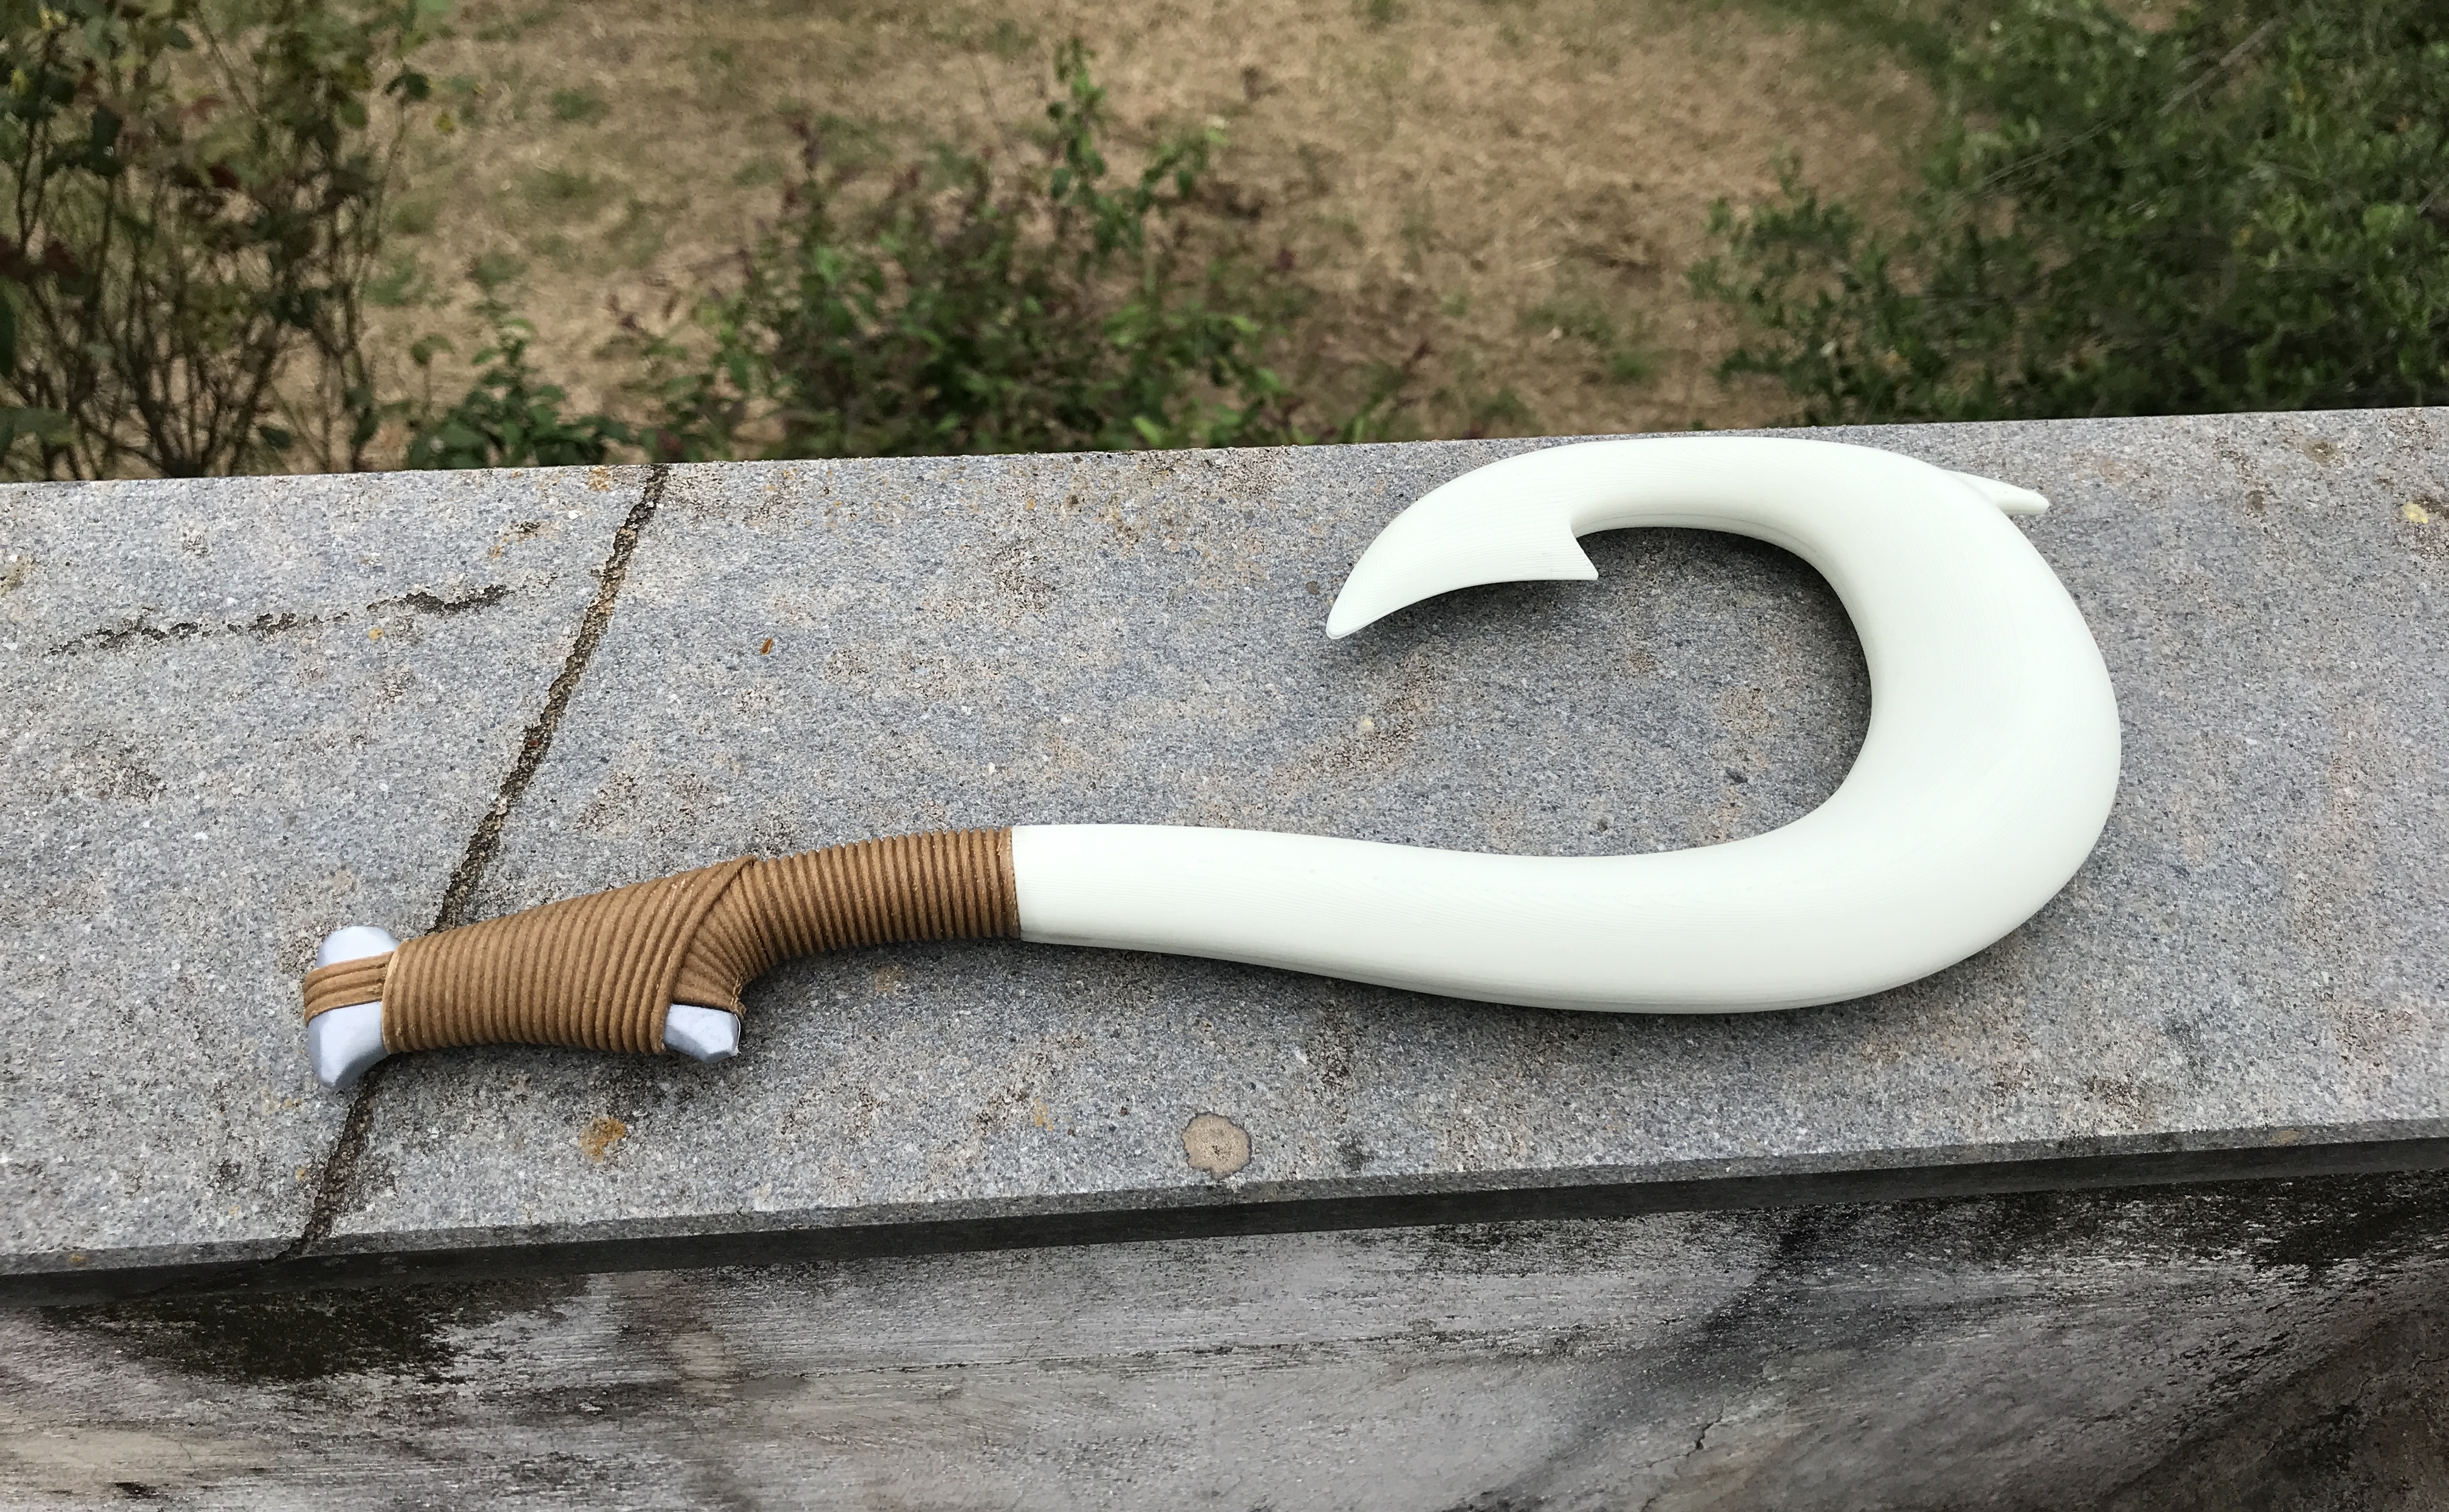 3d Printable Maui S Magical Fish Hook From The Movie Moana By Martin Moore